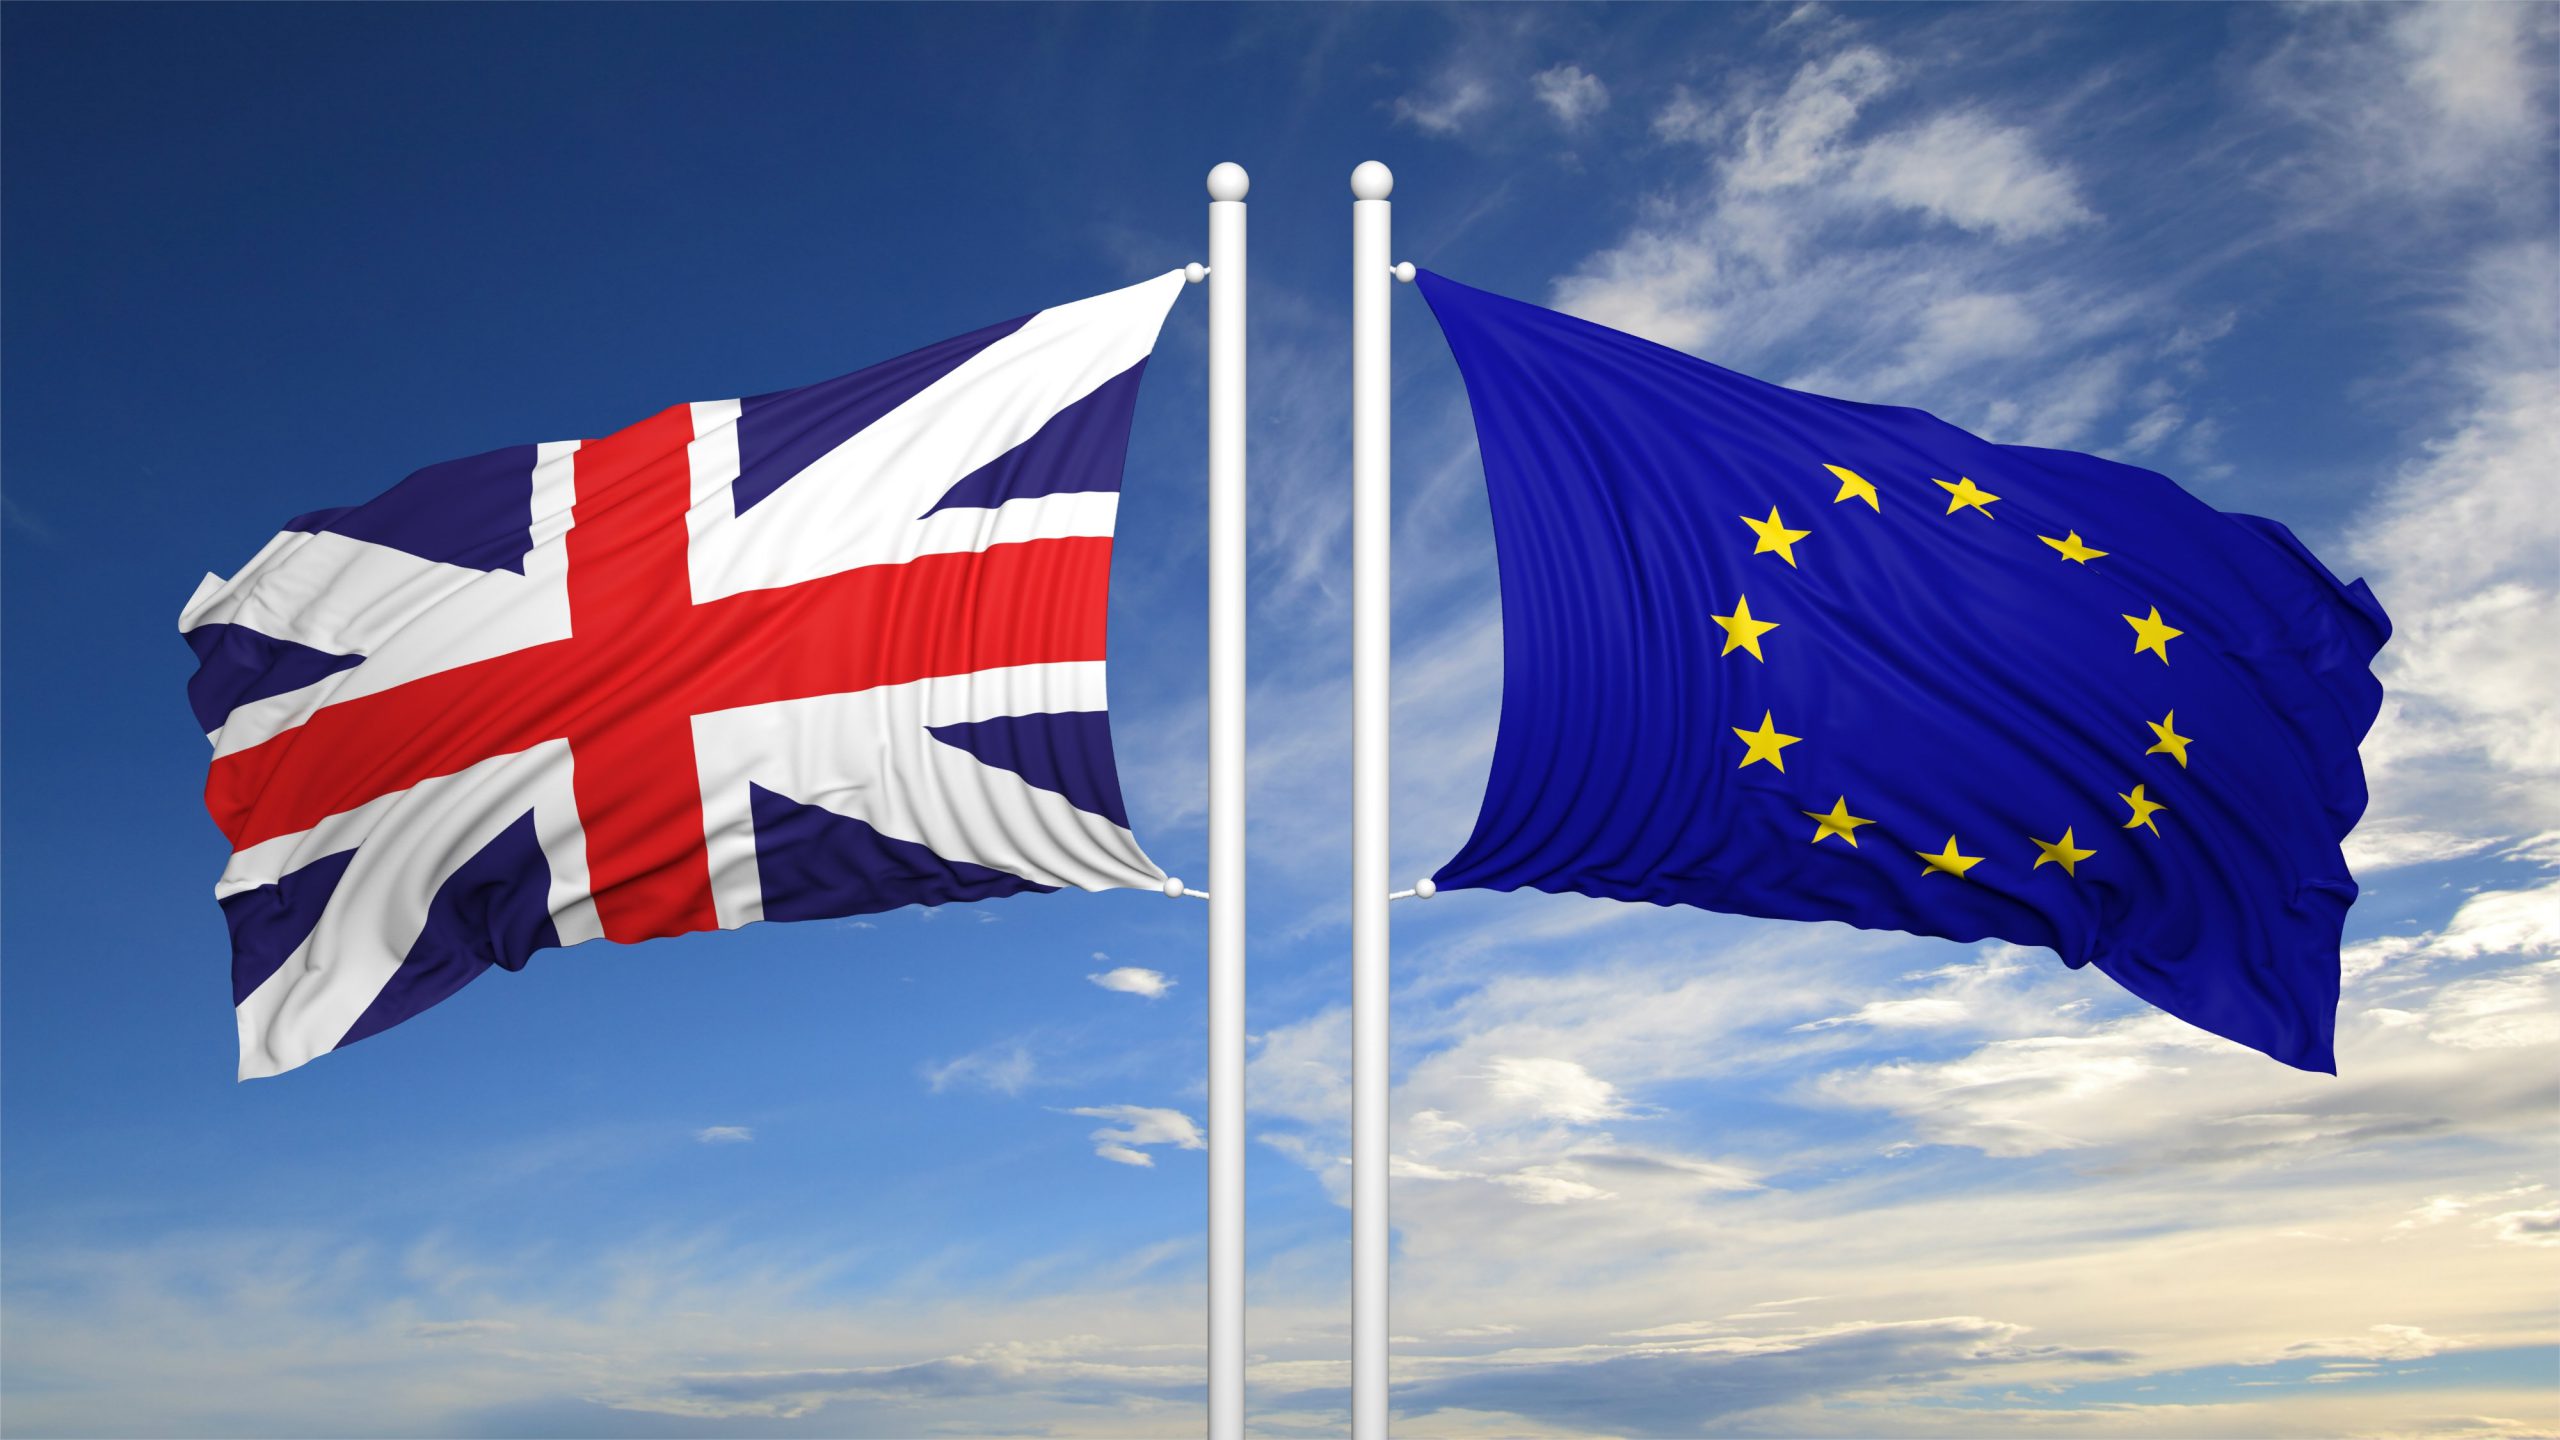 On June 23, British citizens will decide whether to leave the European Union or not.